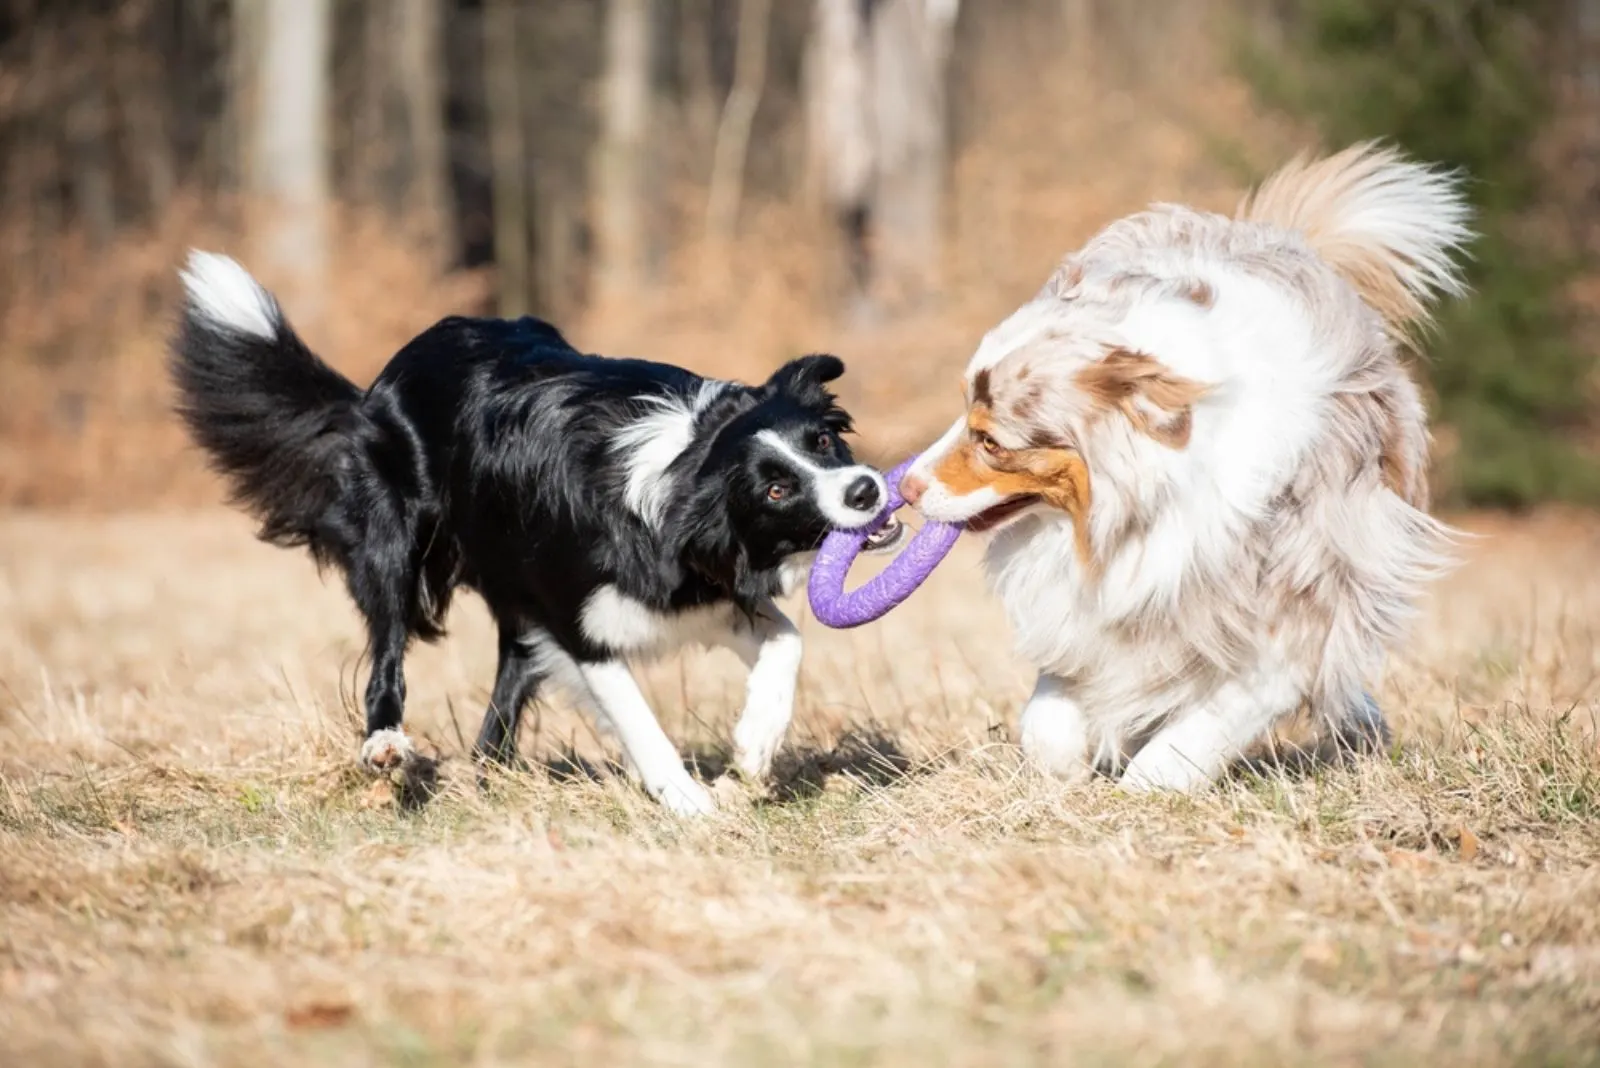 australian shepherd and border collie dog playing together with a toy